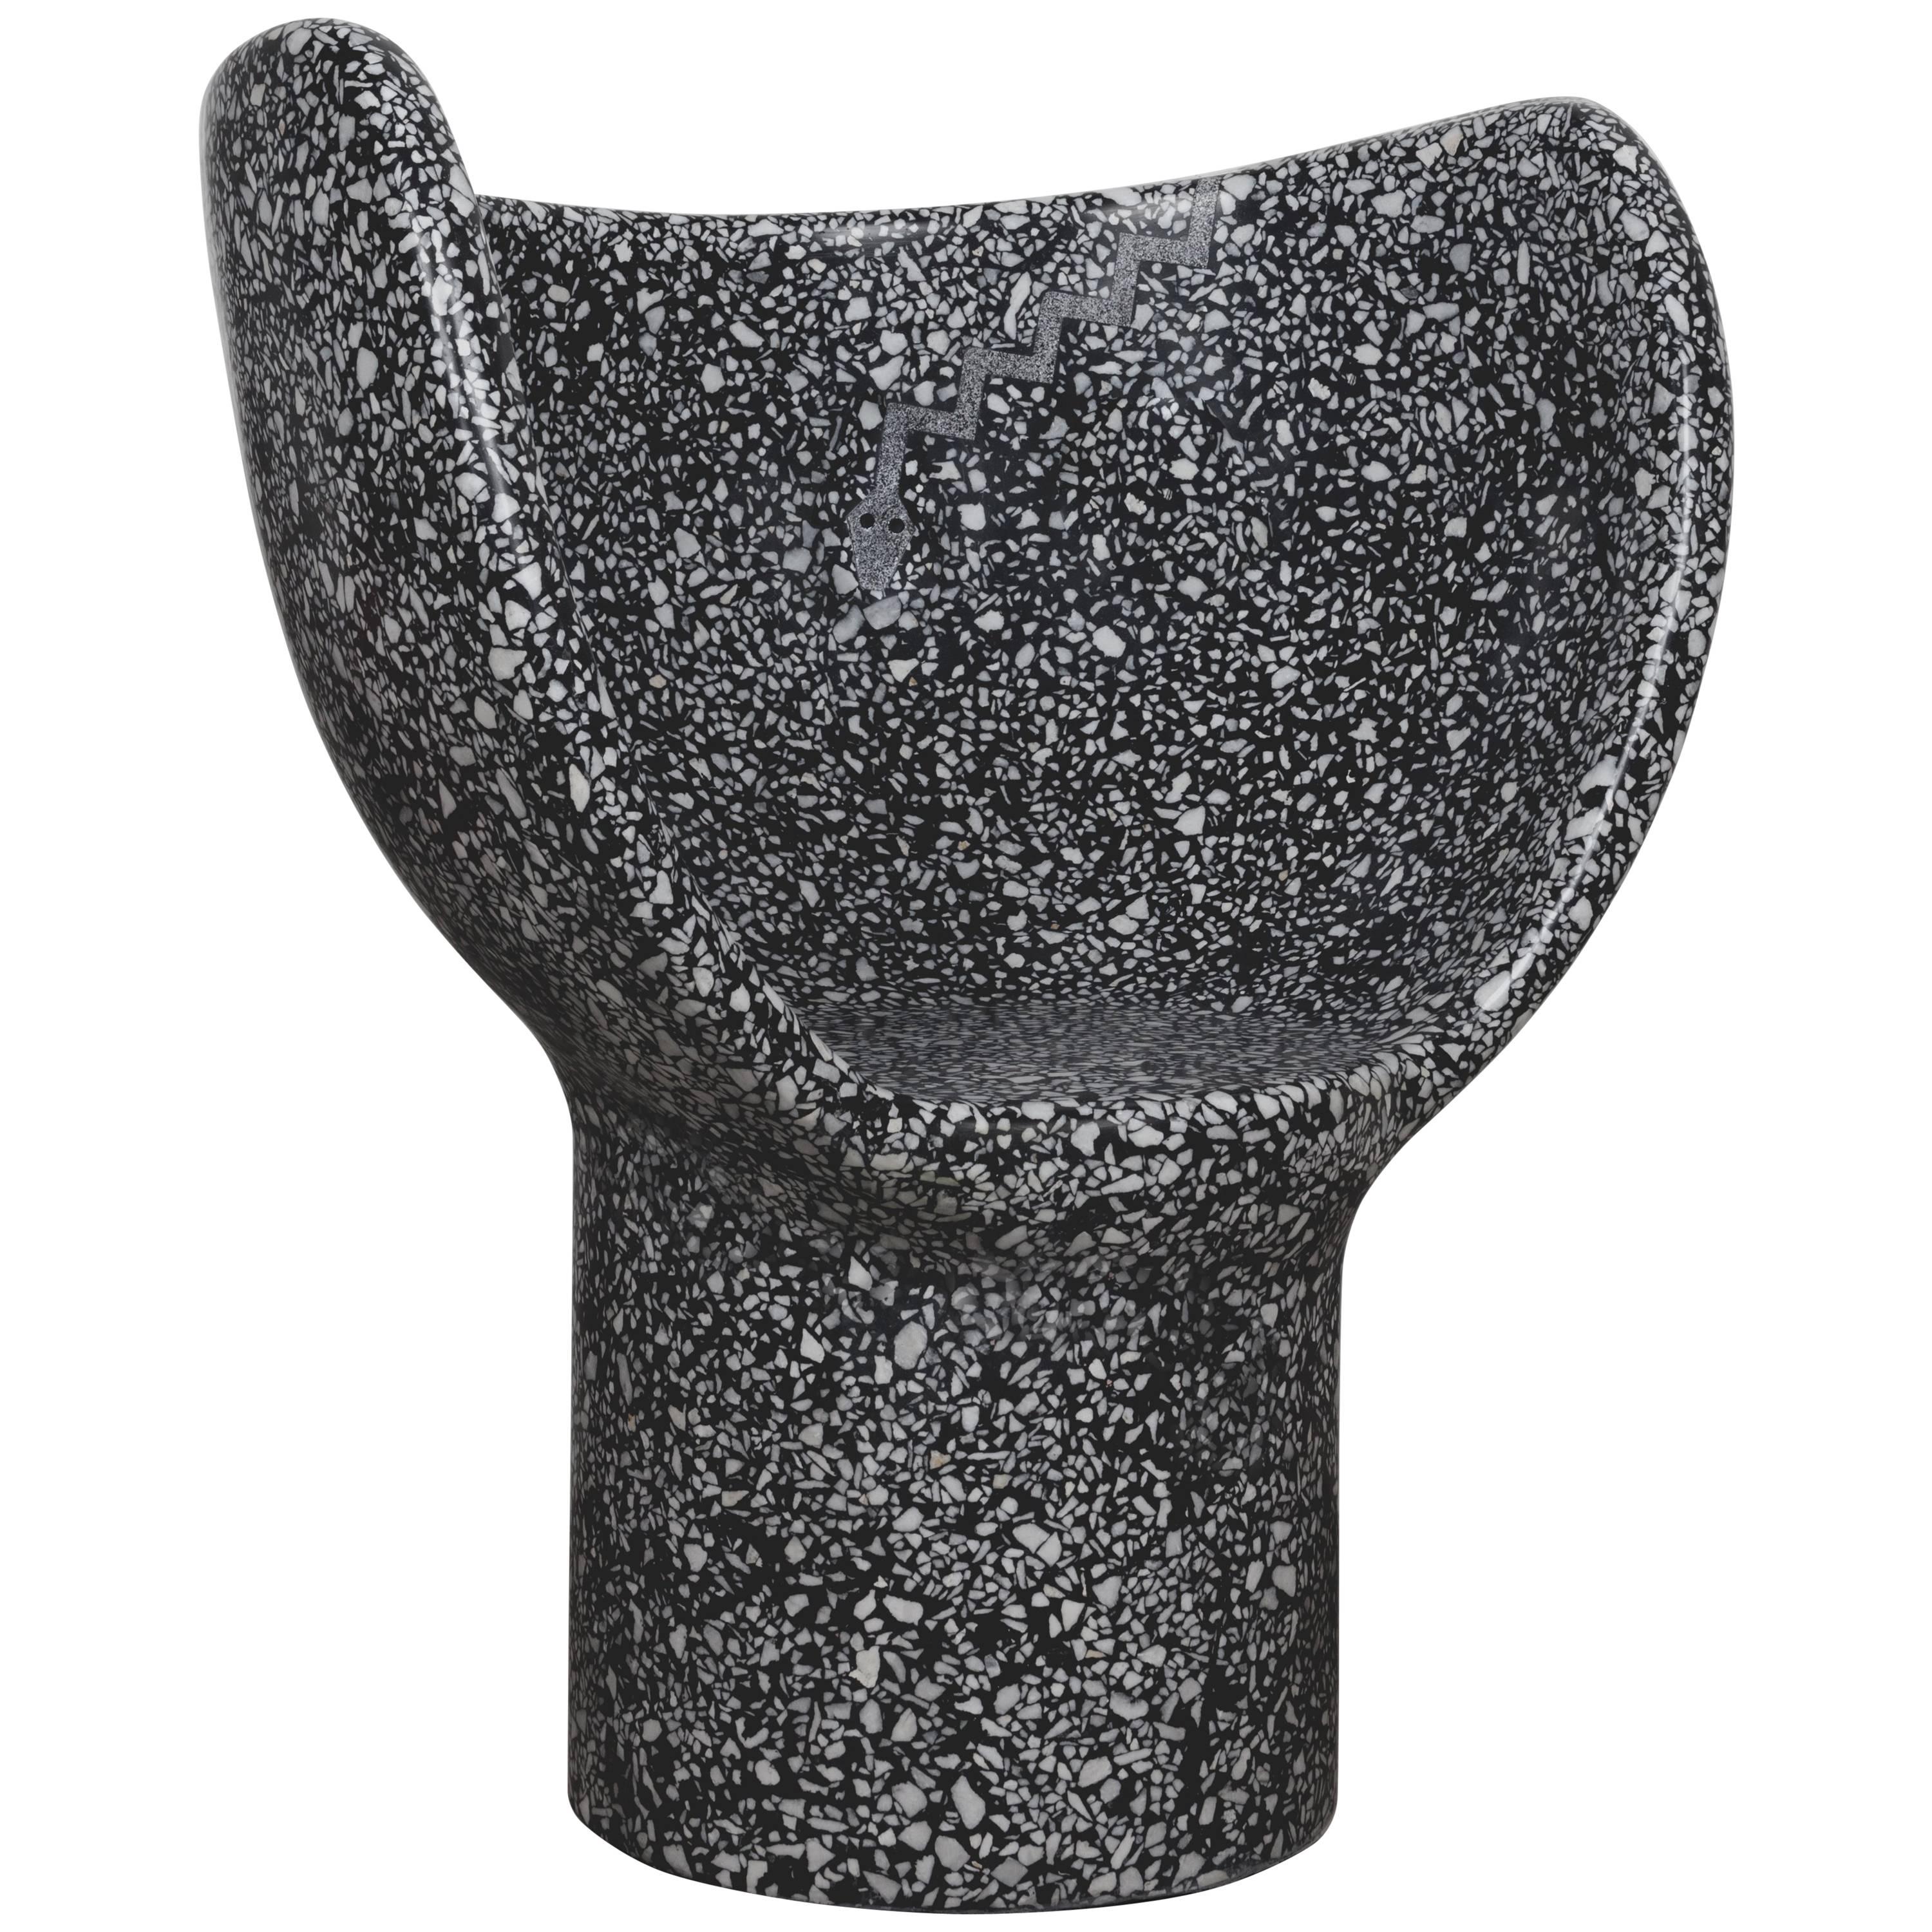 Sculptural Moon Snake Accent Chair, Black Cement/White Marble Terrazzo For Sale